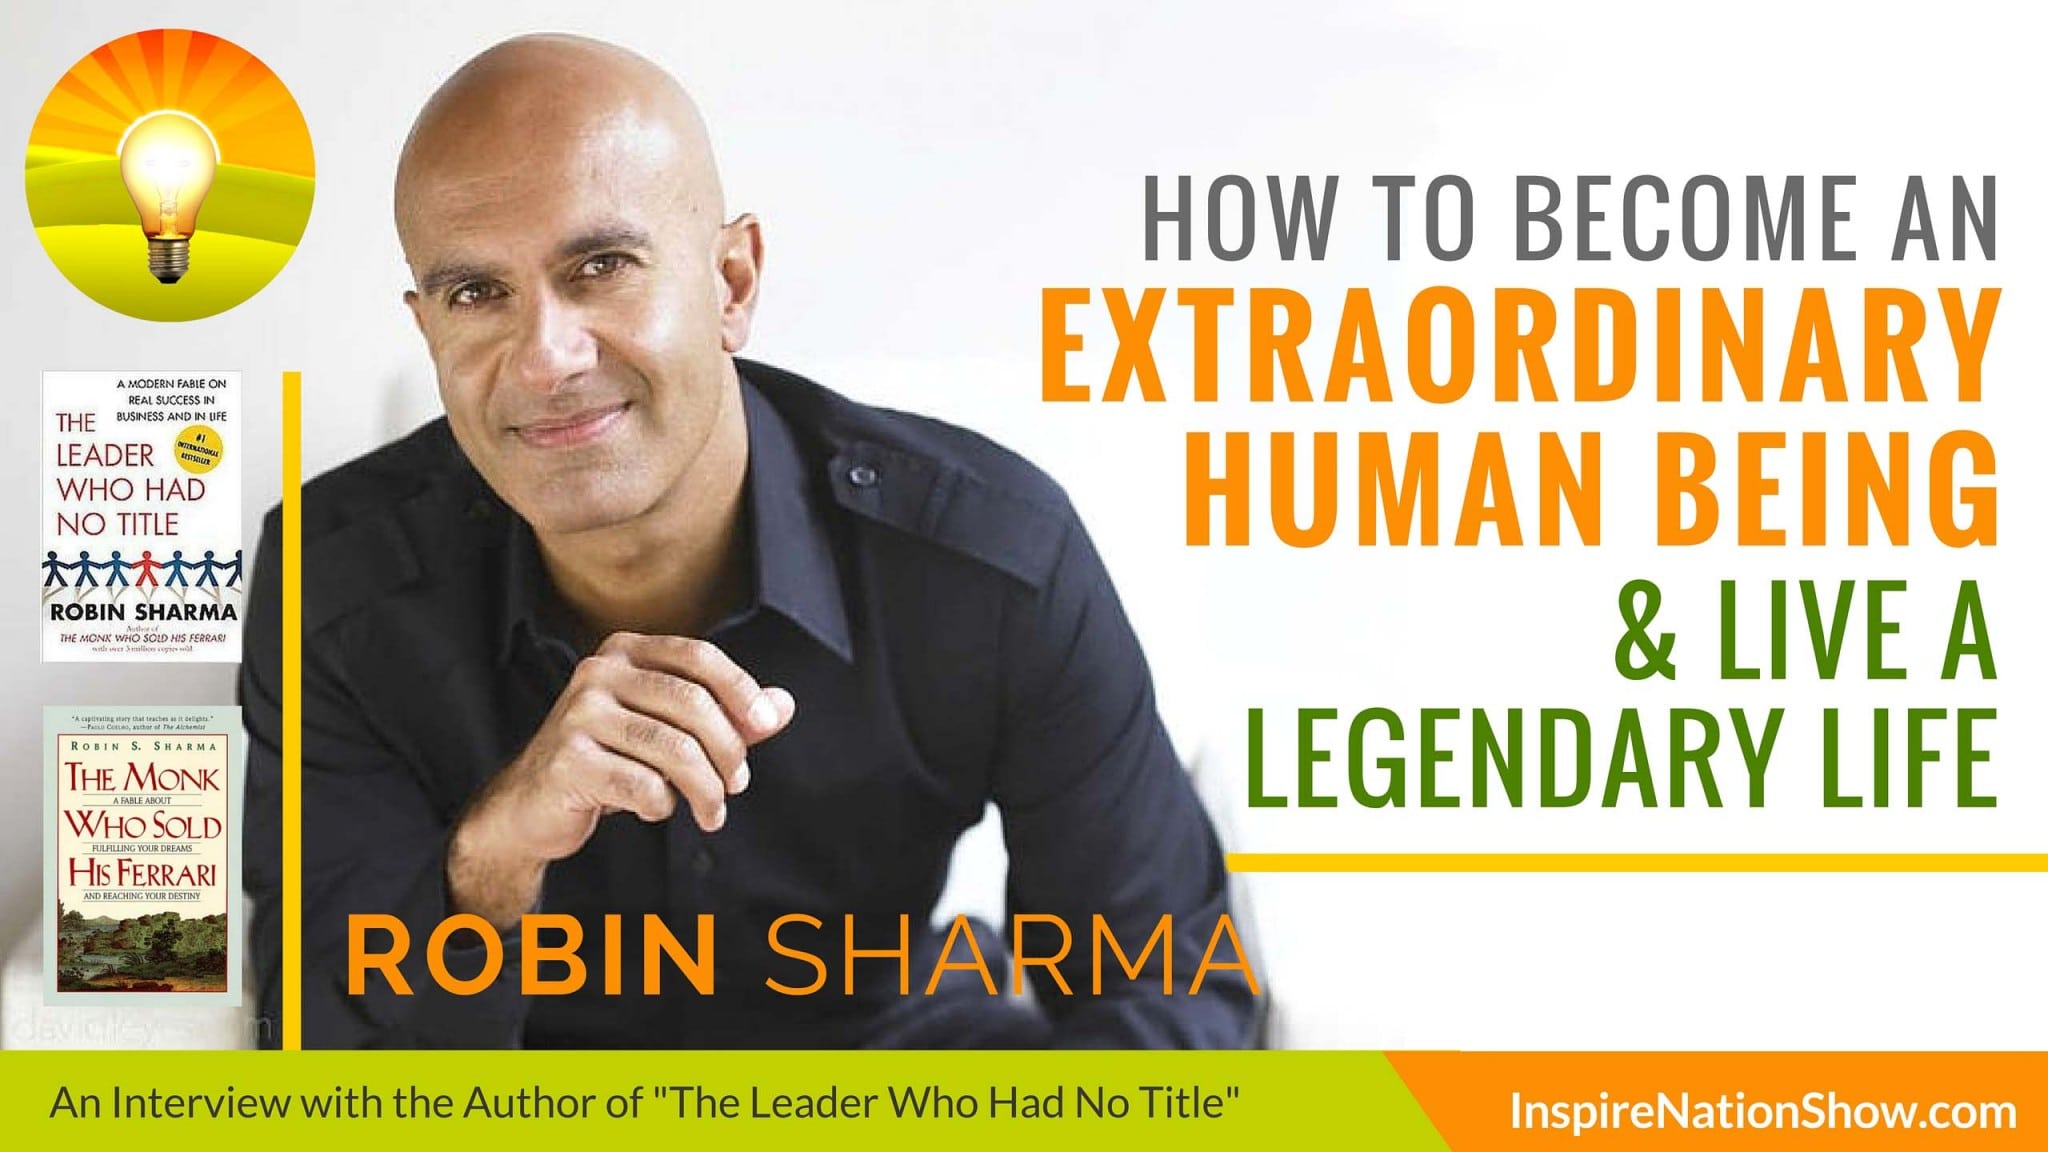 Robin Sharma-Inspire-Nation-Show-podcast-The-Leader-Who-Had-No-Title-The-Monk-Who-Sold-His-Ferrari-extraordinary-human-being-legendary-life-career-self-help